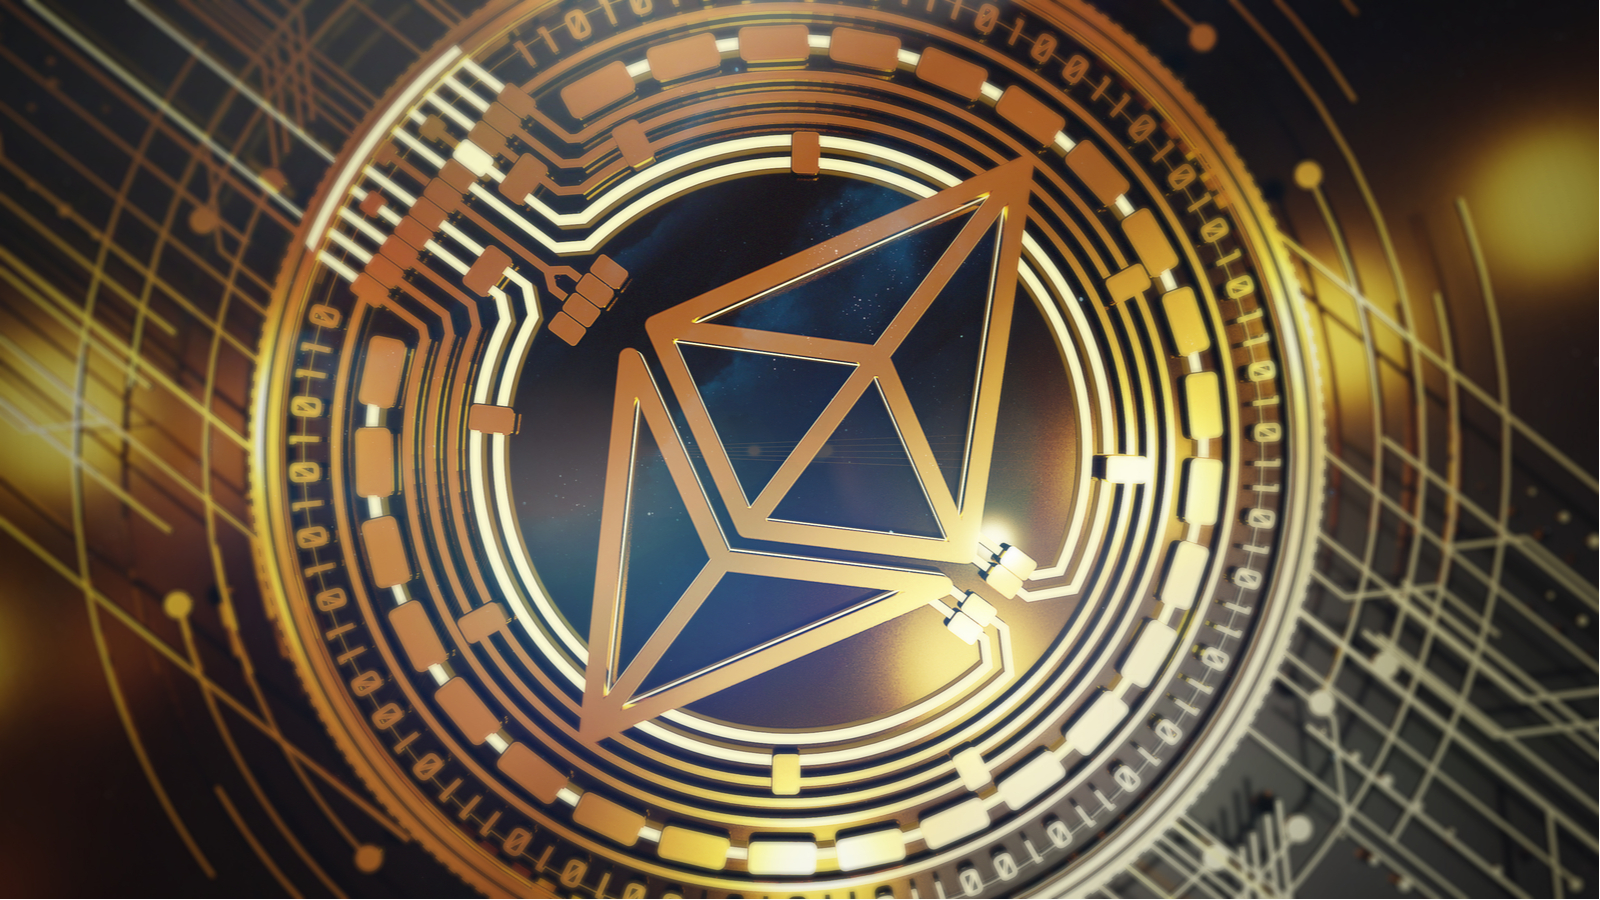 How Much Will Eth Be Worth In 2021 : Ethereum Price Prediction Major Upgrades Could Help Ethereum Hit 20 000 By 2025 / Since january 2020, eth has trounced bitcoin (ccc:btc) with a nearly 750% return.